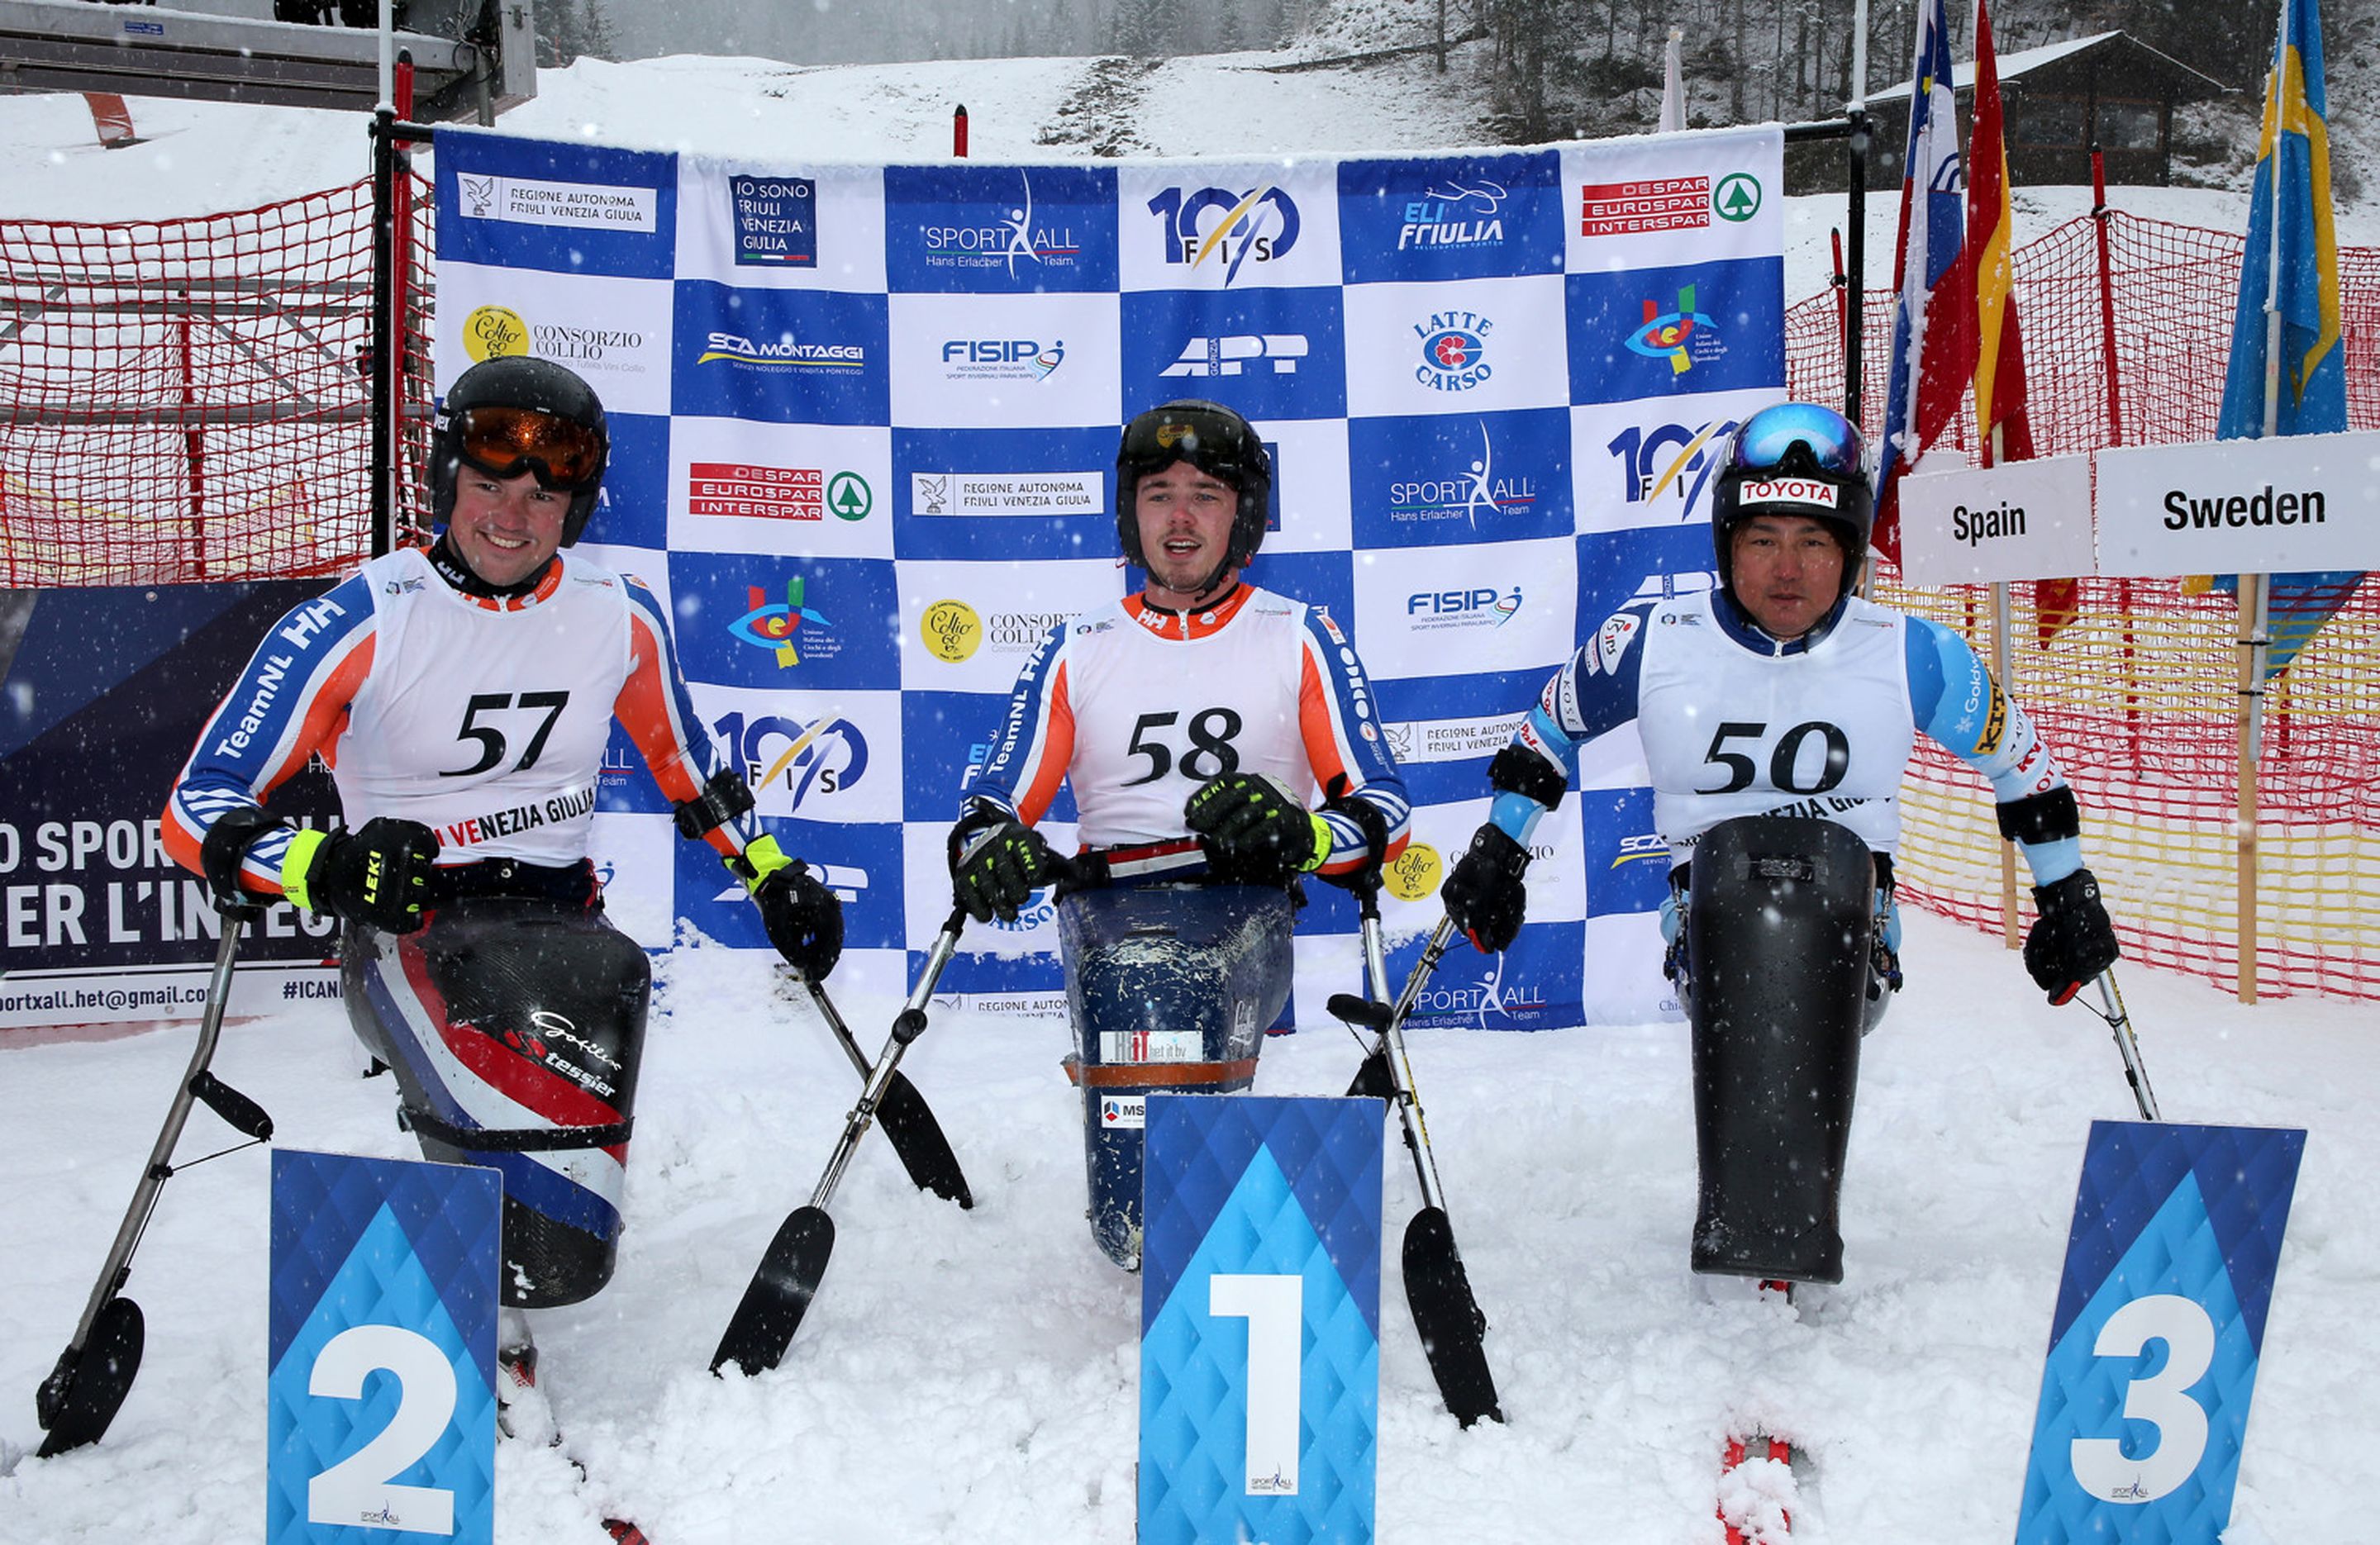 Niels De Langen (NED), Jeroen Kampschreur (NED) and Taiki Morii (JPN) in the finish area after the second run of the last giant slalom in Sella Nevea